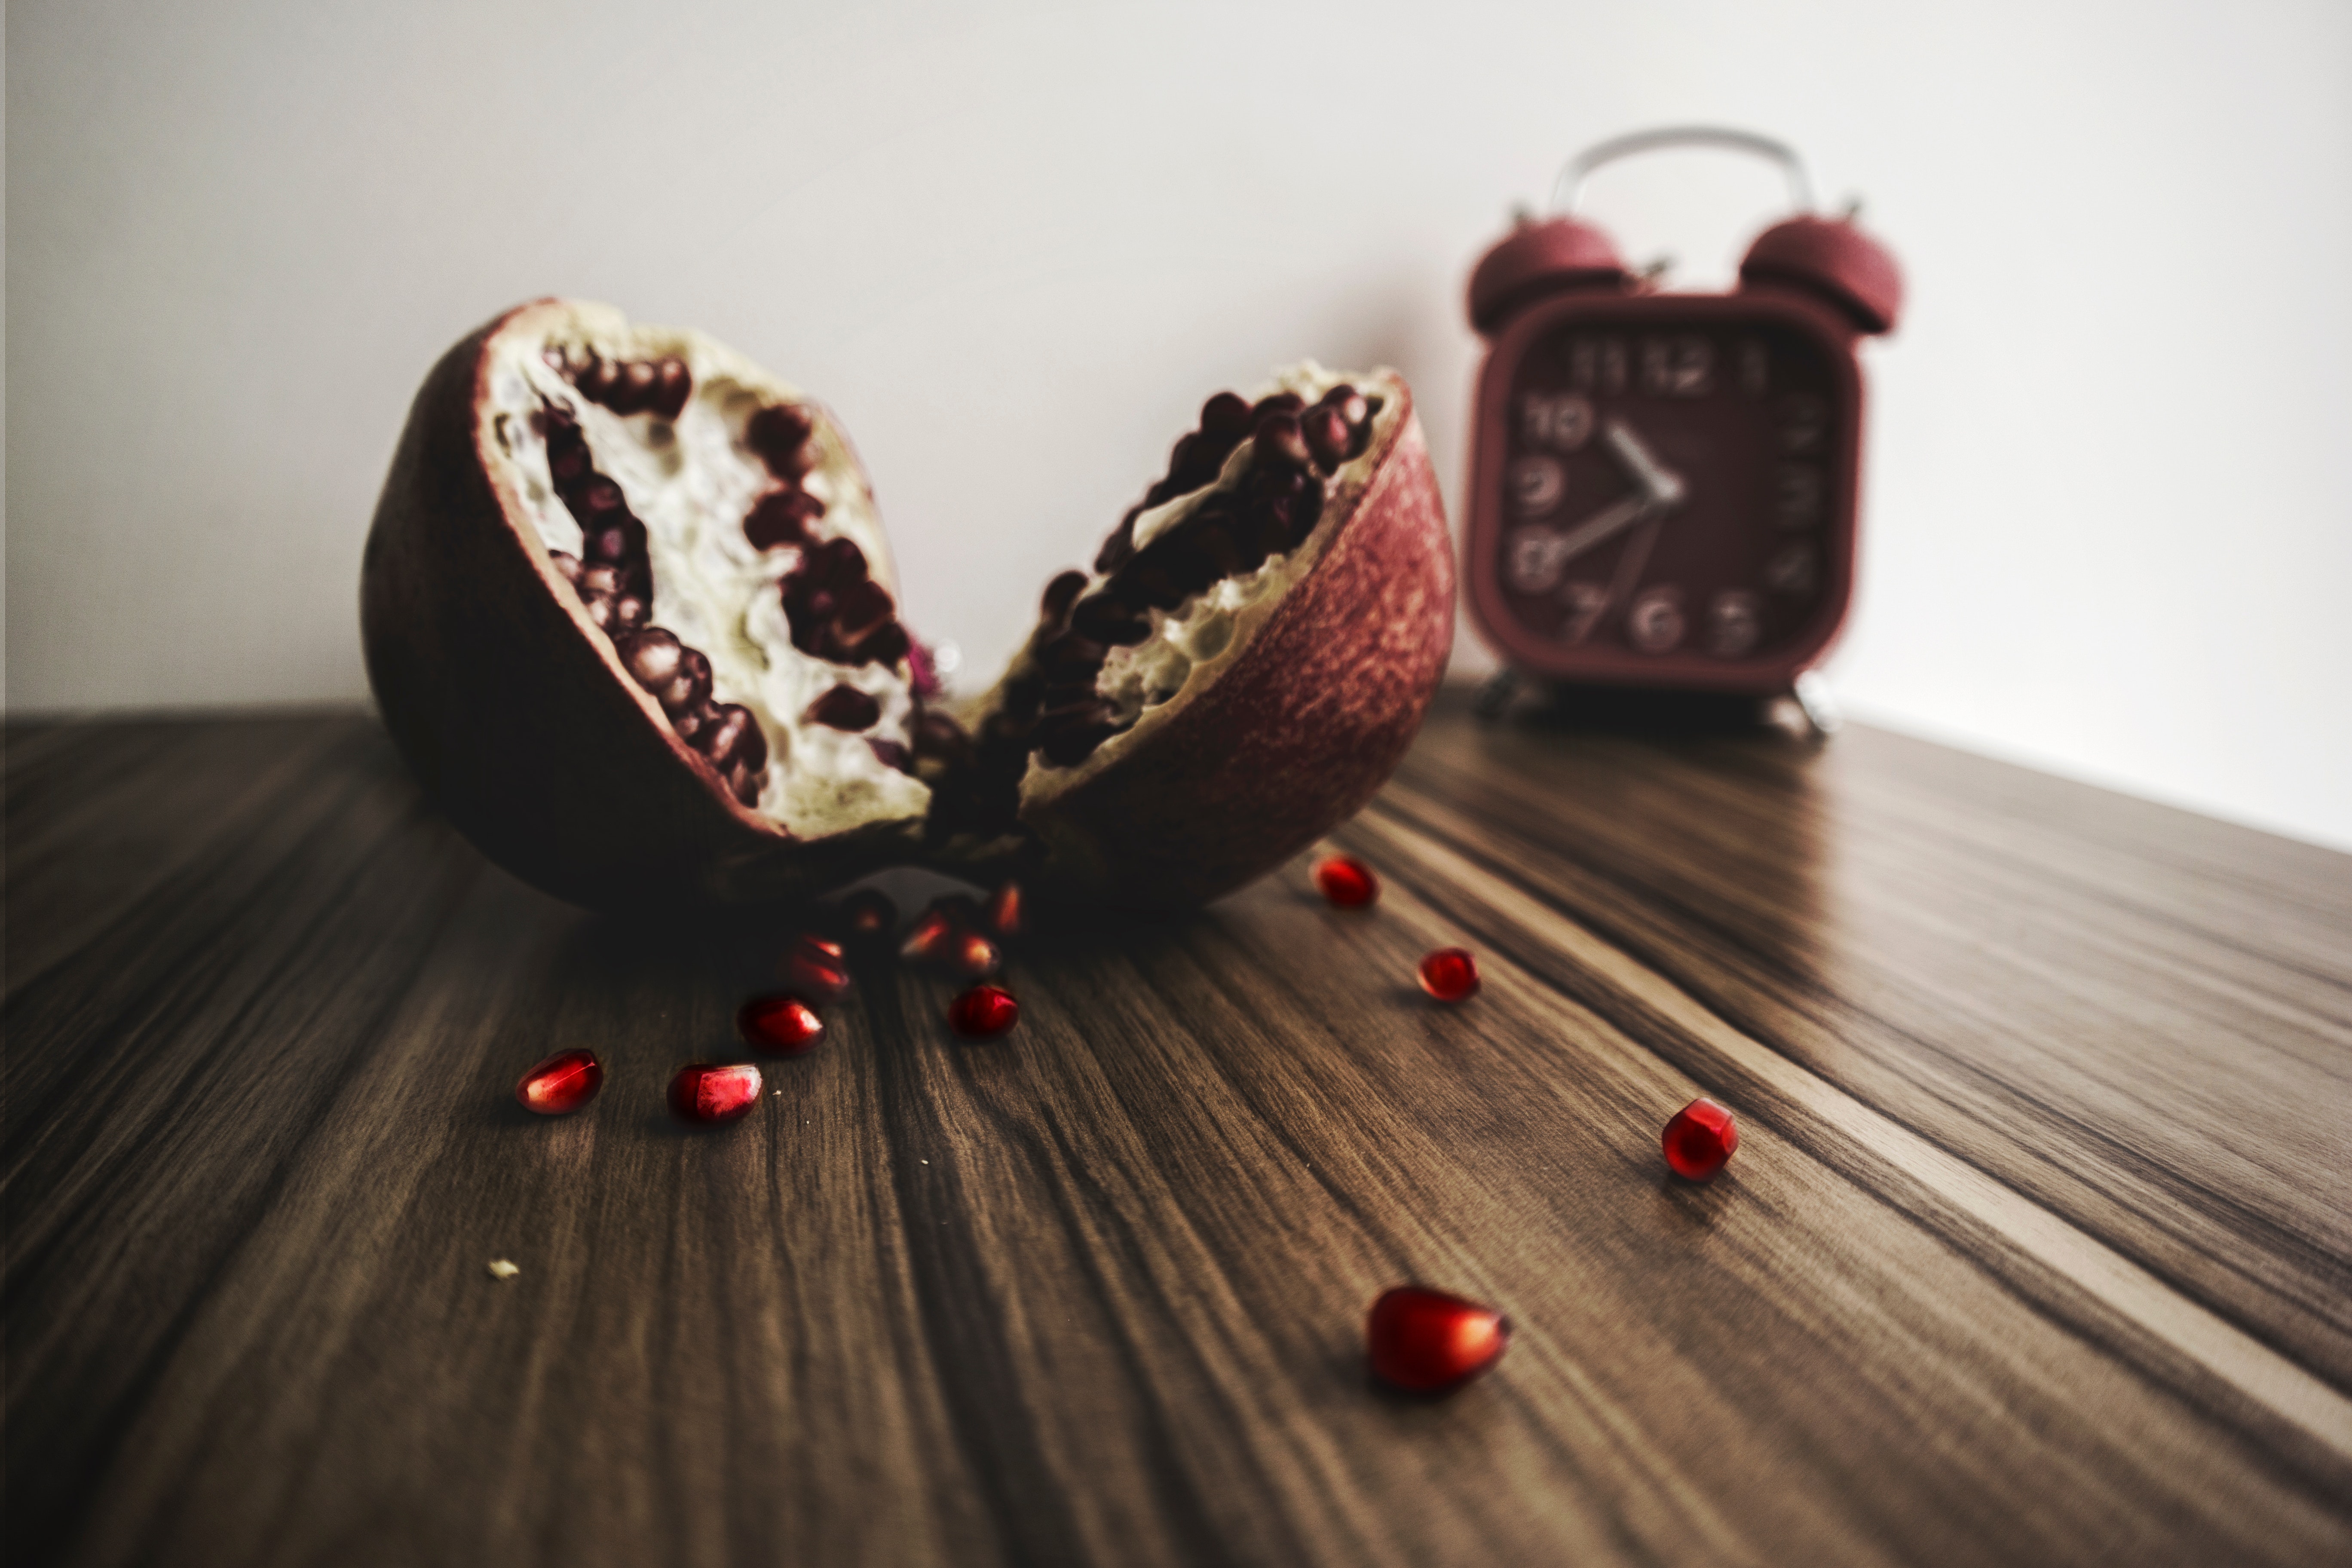 Red and white round fruit on brown wooden table with red alarm clock photo